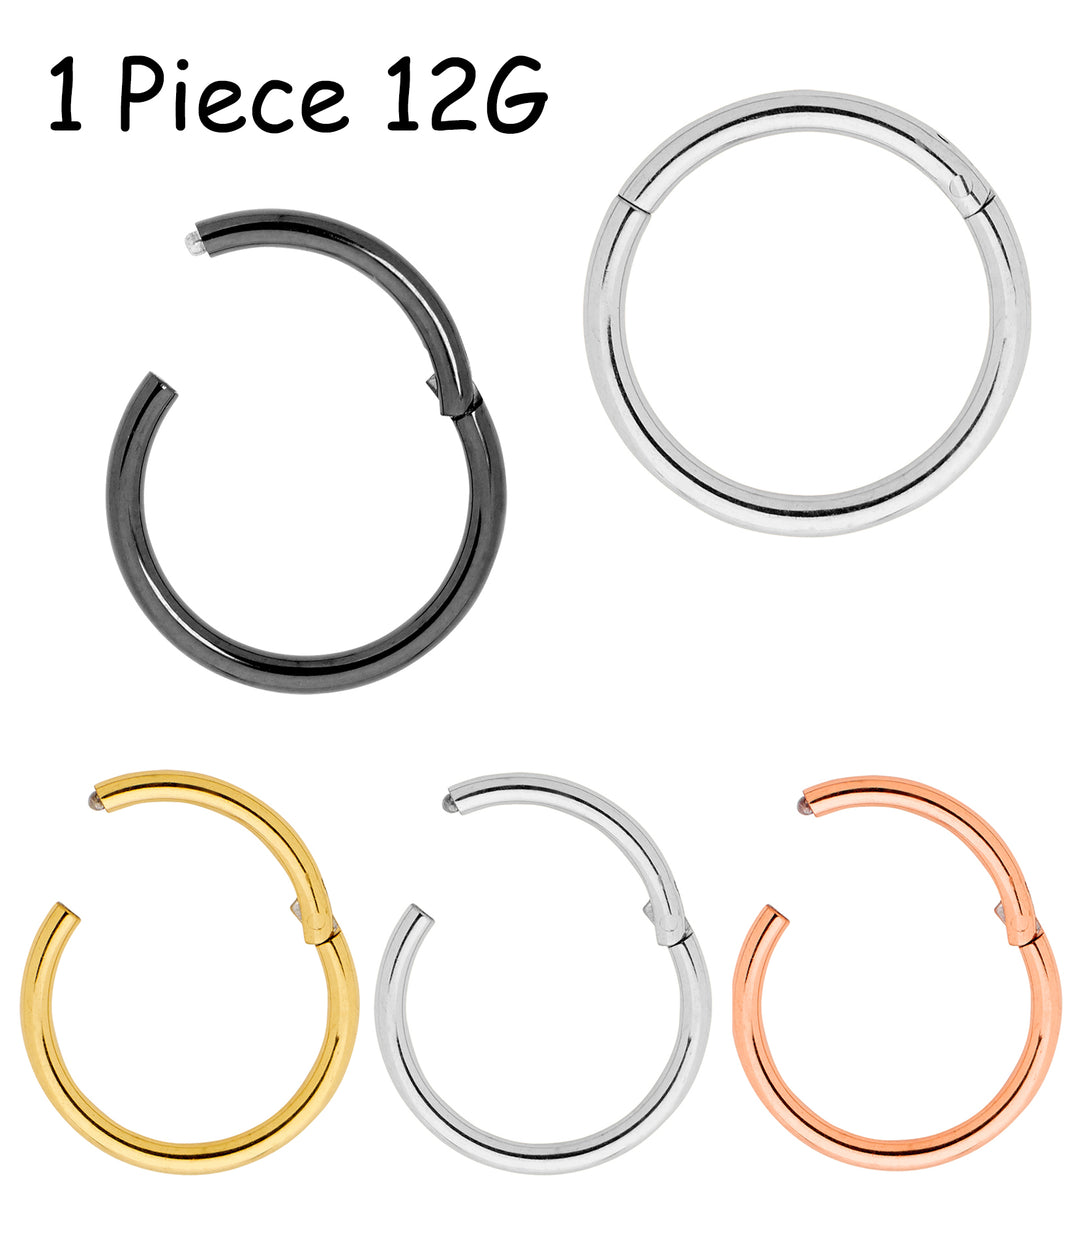 1 Piece 12G Stainless Steel Polished Hinged Hoop Segment Nose Ring Earring 10mm – 18mm